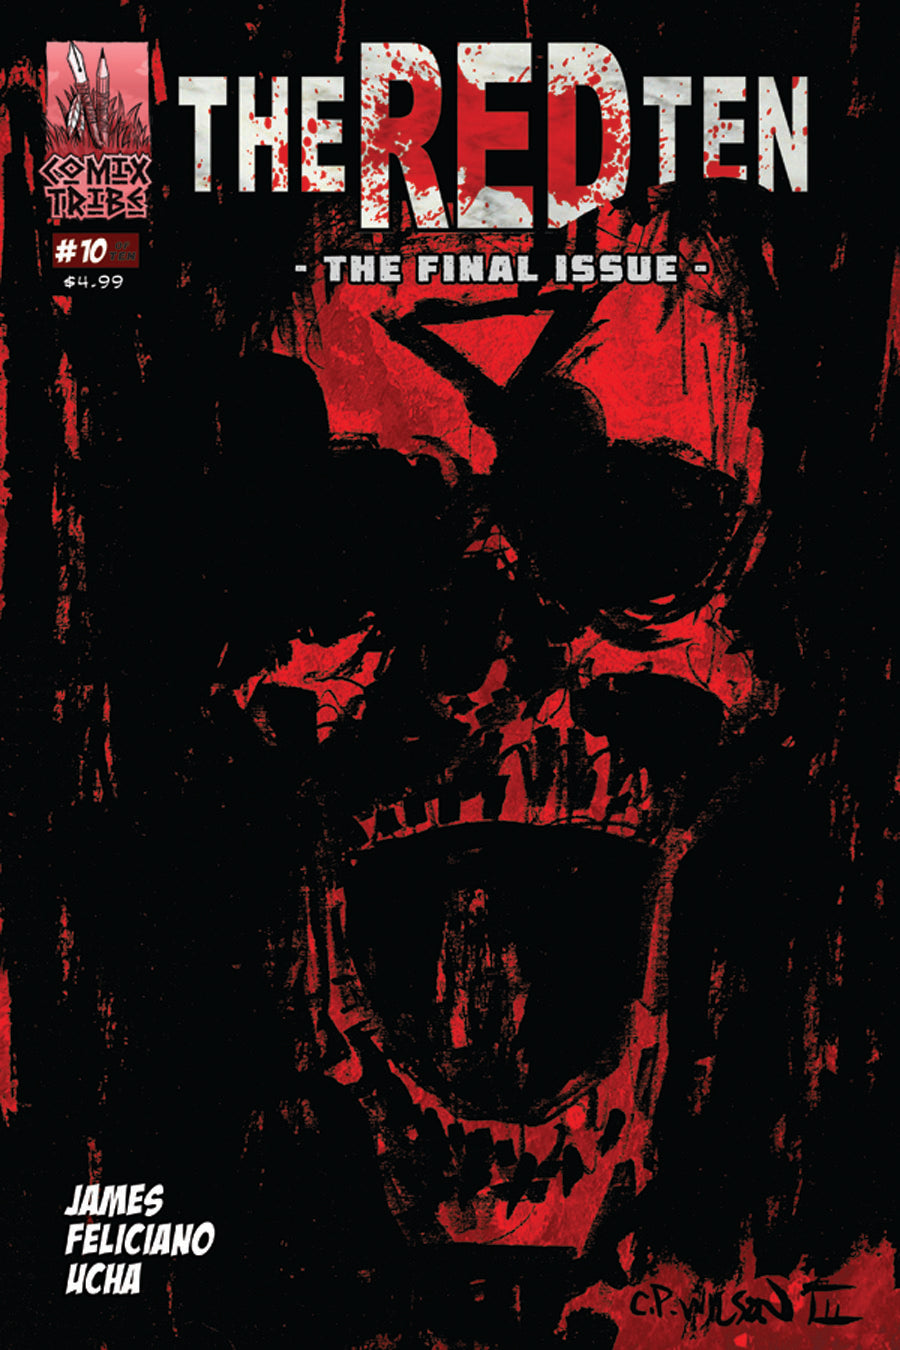 THE RED TEN #10 of 10 - Final Issue!